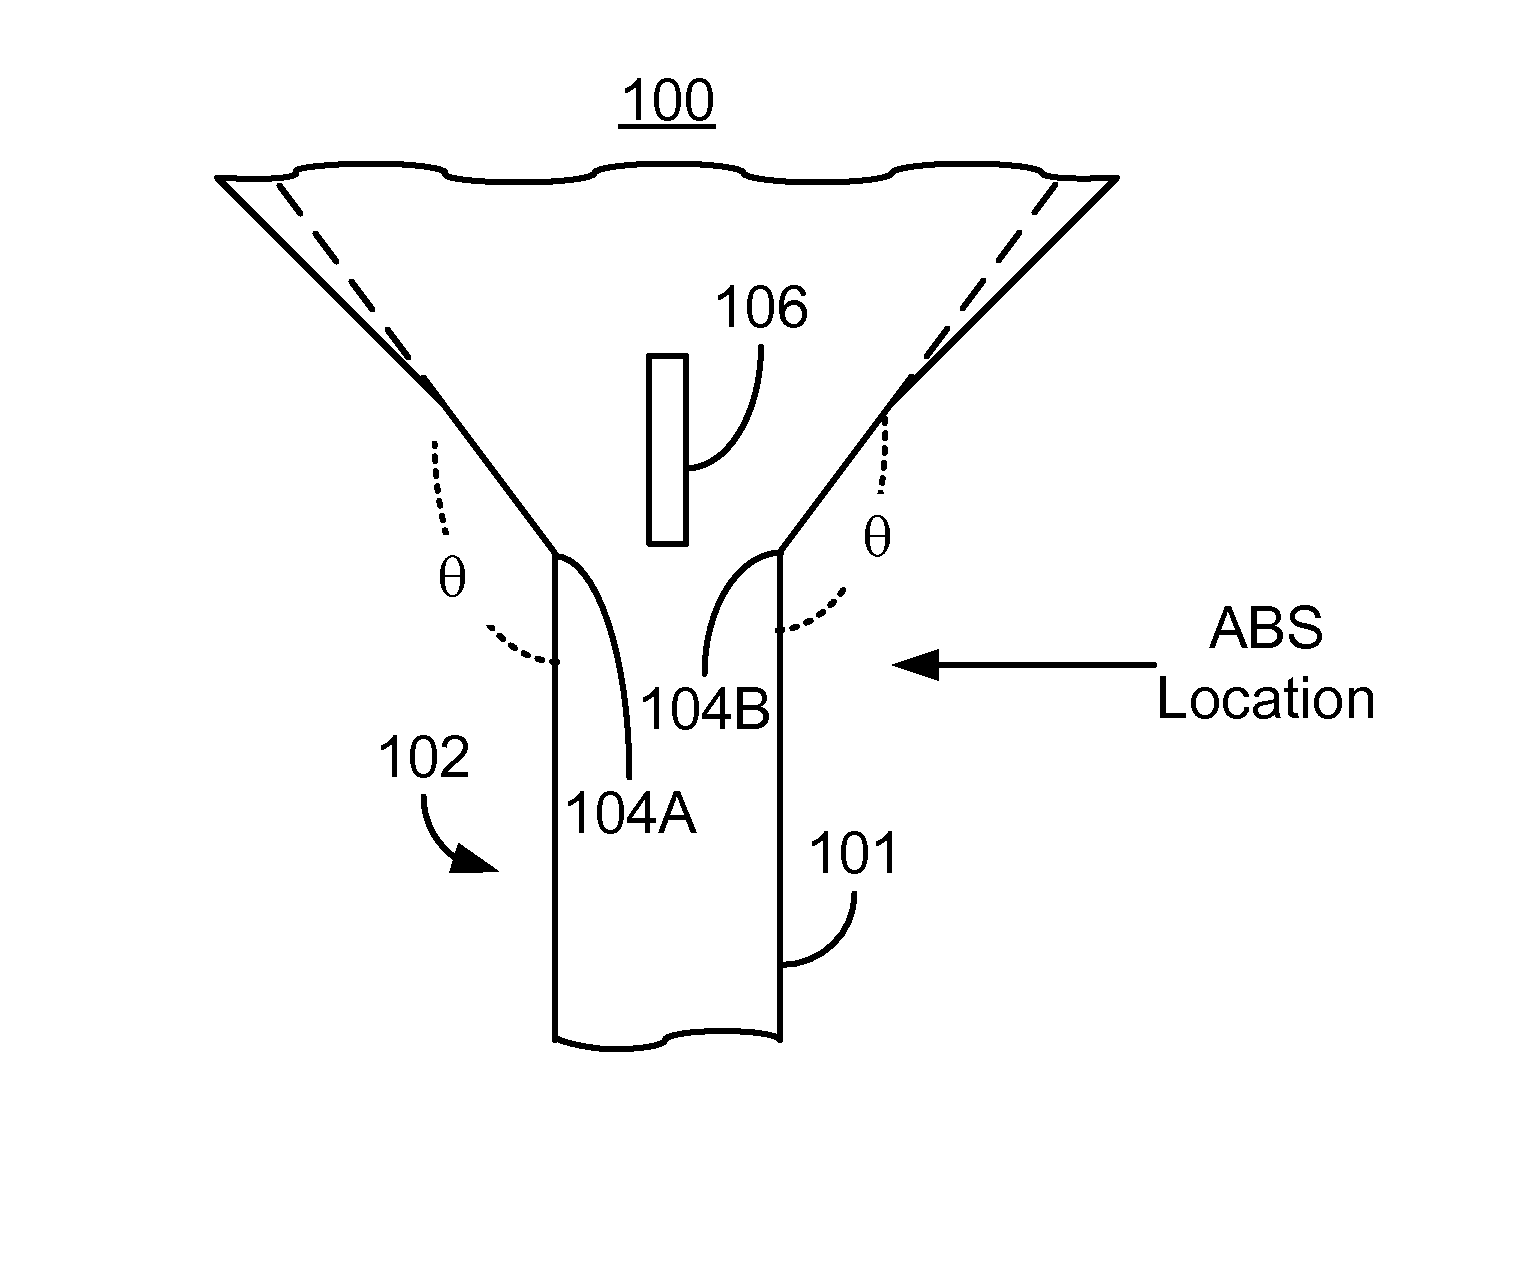 Method and system for providing optical proximity correction for structures such as a PMR nose